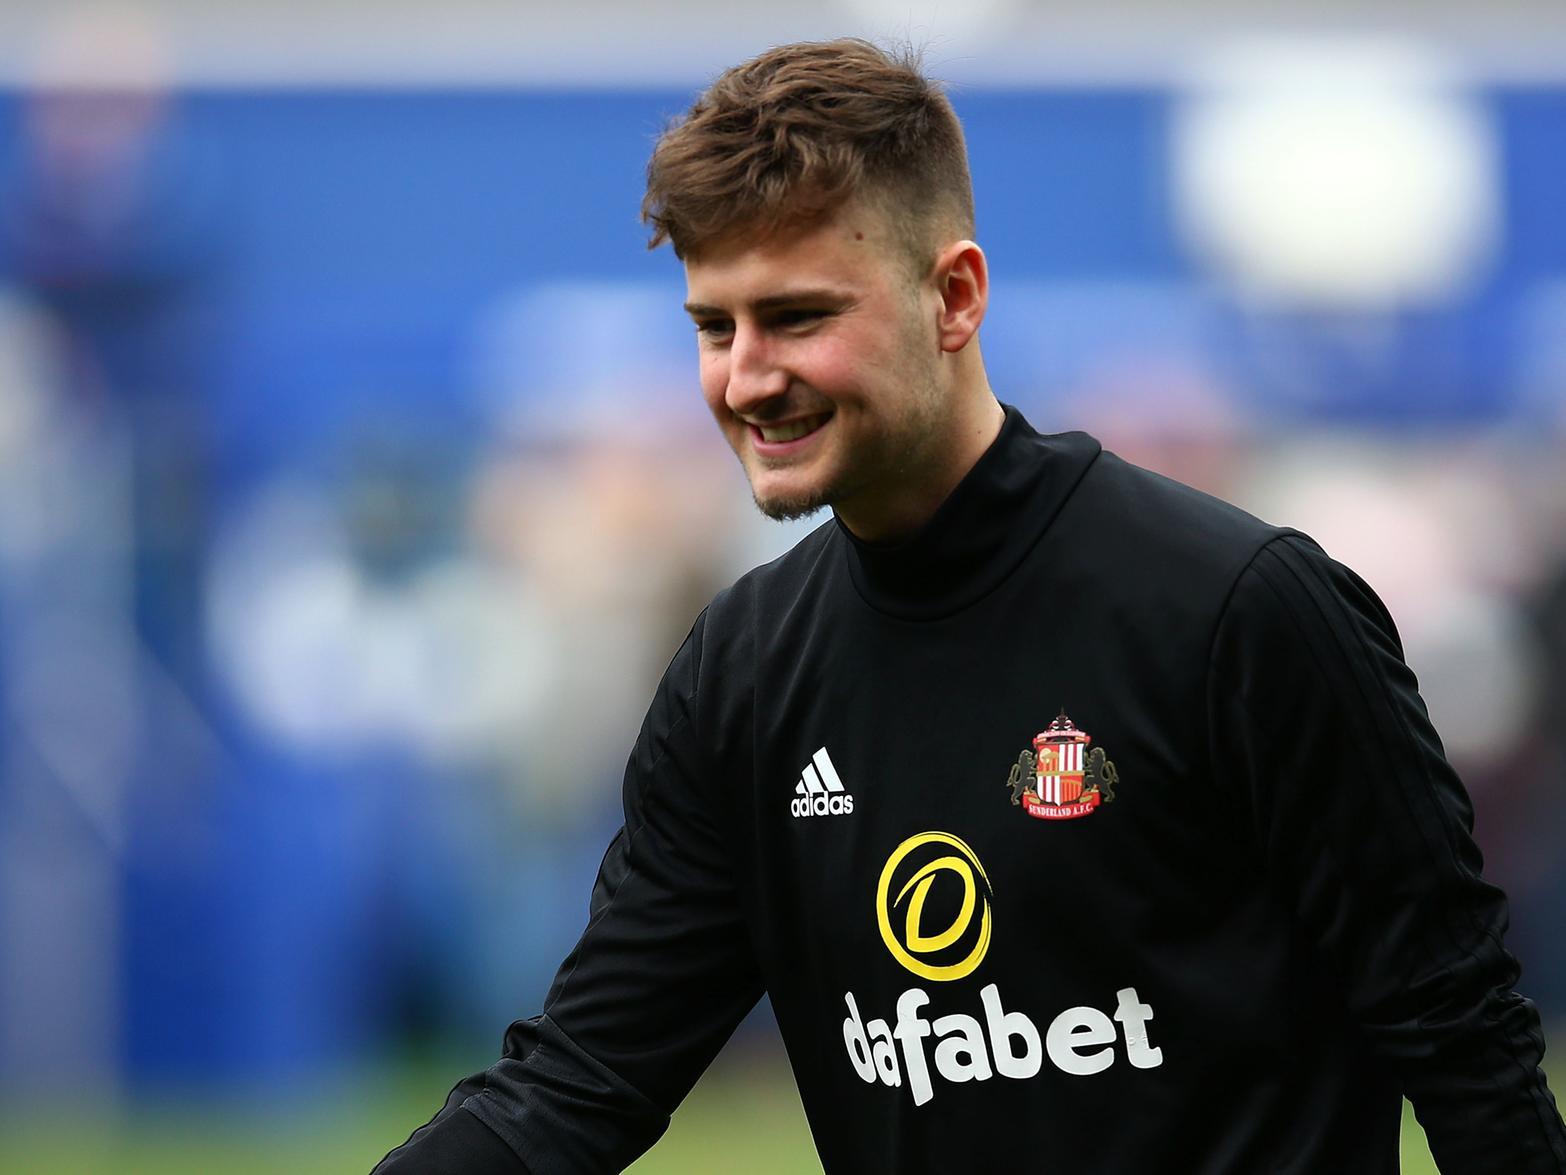 The Sunderland-born 22-year-old midfielder has recently returned from a stint at League Two Grimsby Town